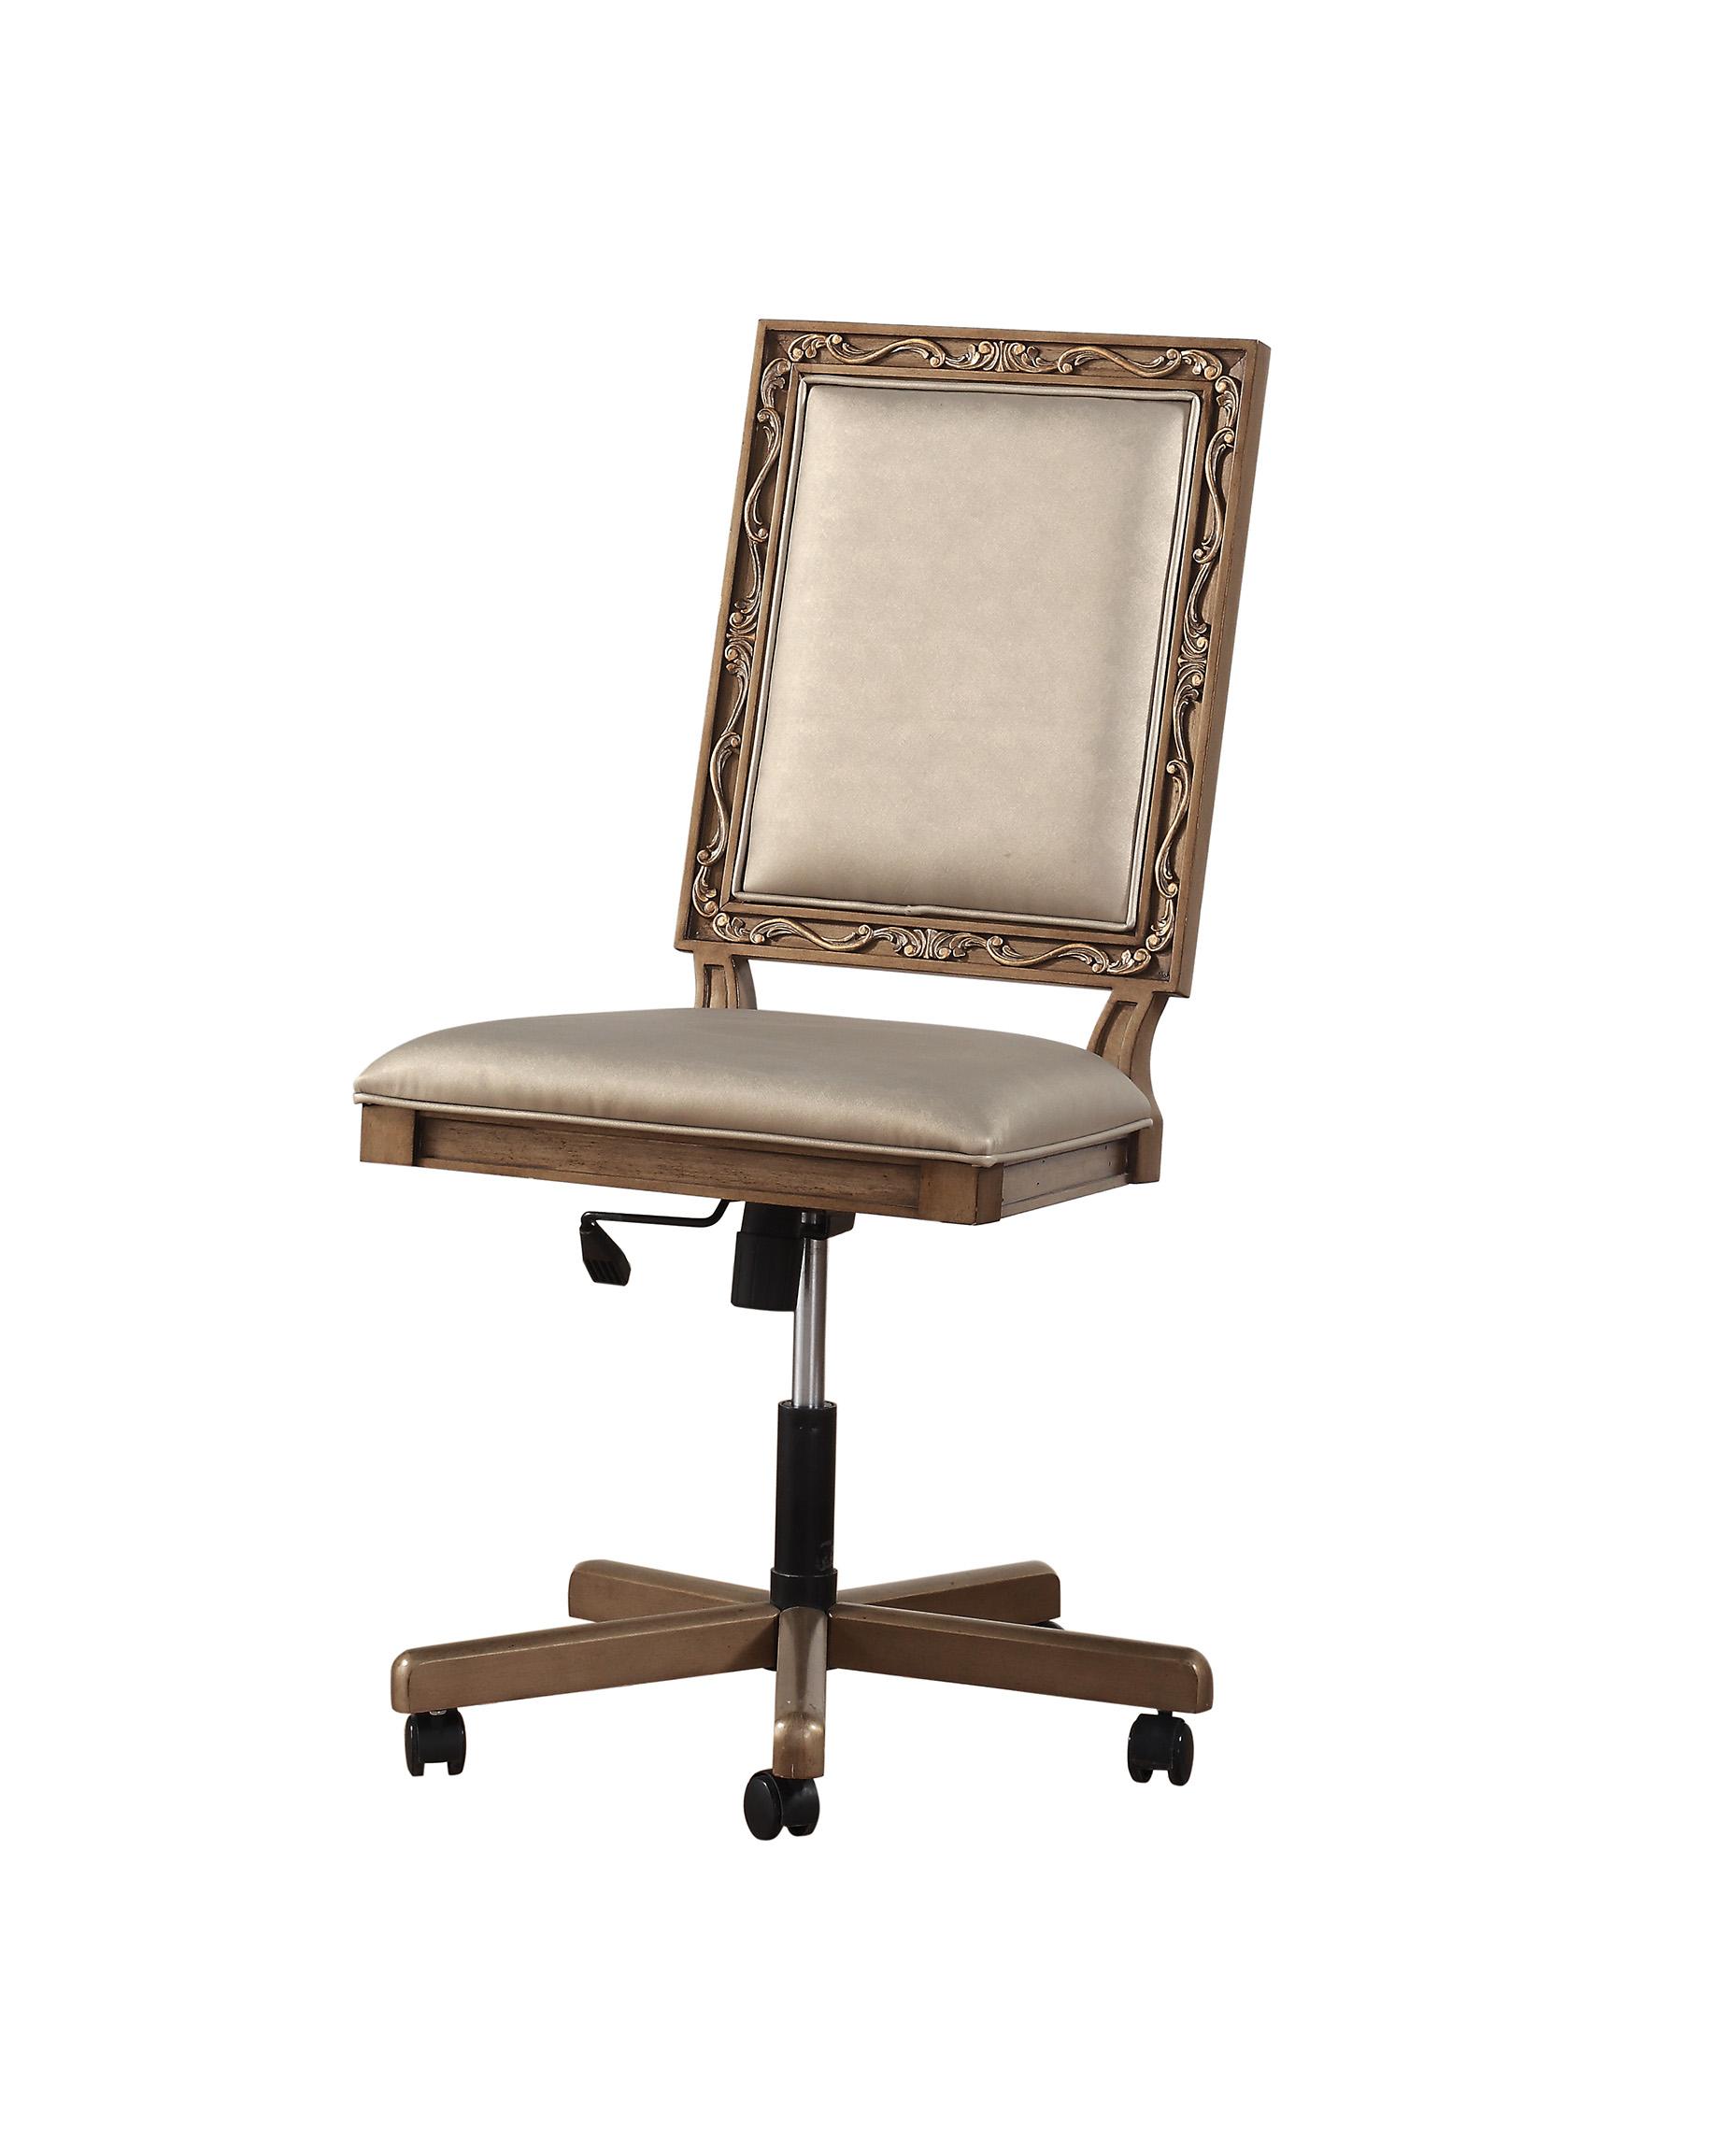 

    
Home Office Swivel Chair Antique Gold Champagne 91437 Orianne Acme Traditional
